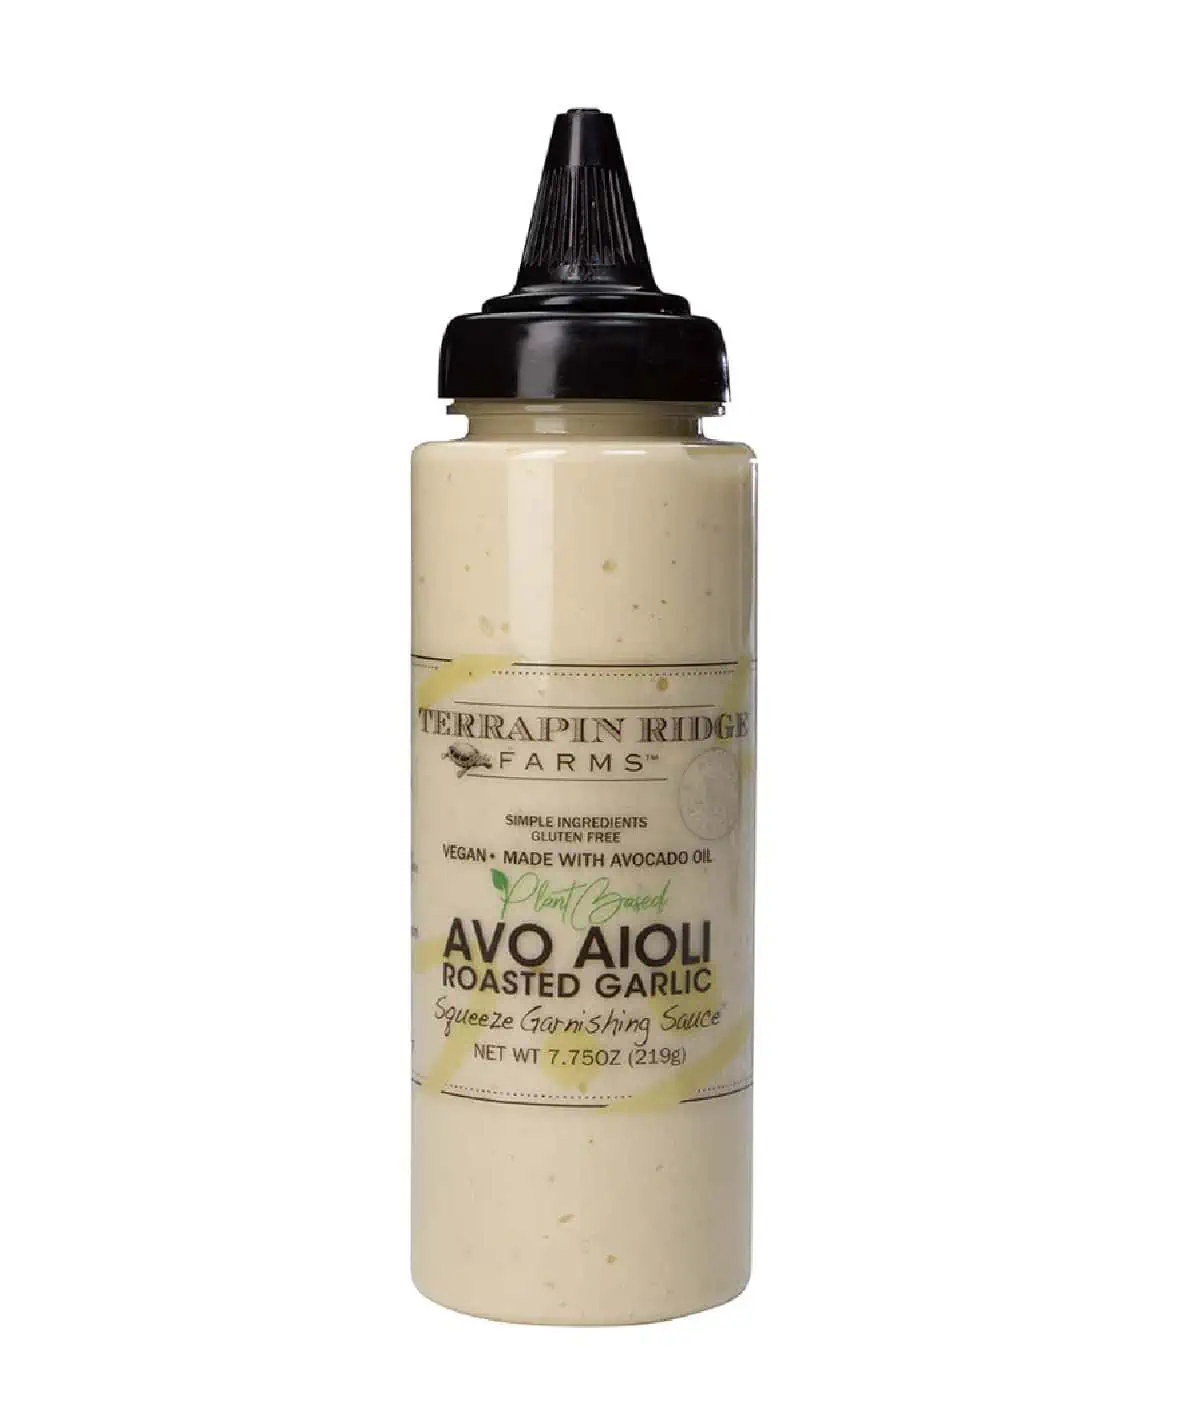 A squeeze bottle with black top containing Terrapin Ridge Farms plant-based Avo Aioli in roasted garlic against a white background.  